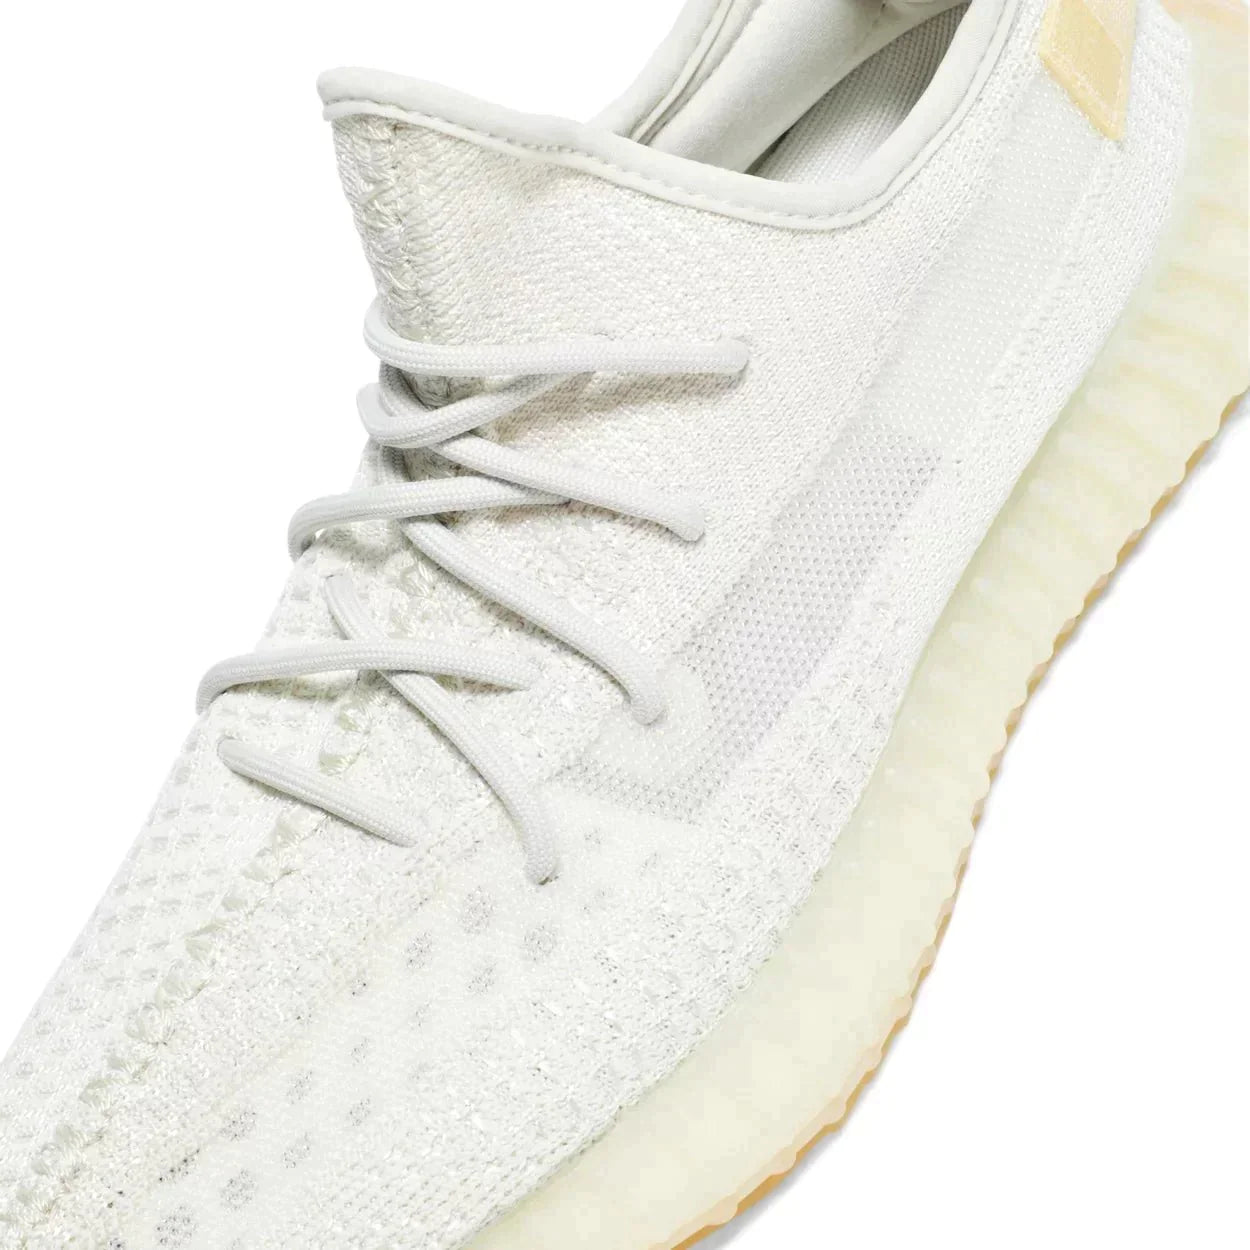 adidas Yeezy Boost 350 V2 Light (2021) Sneakers for Men - GENUINE AUTHENTIC BRAND LLC